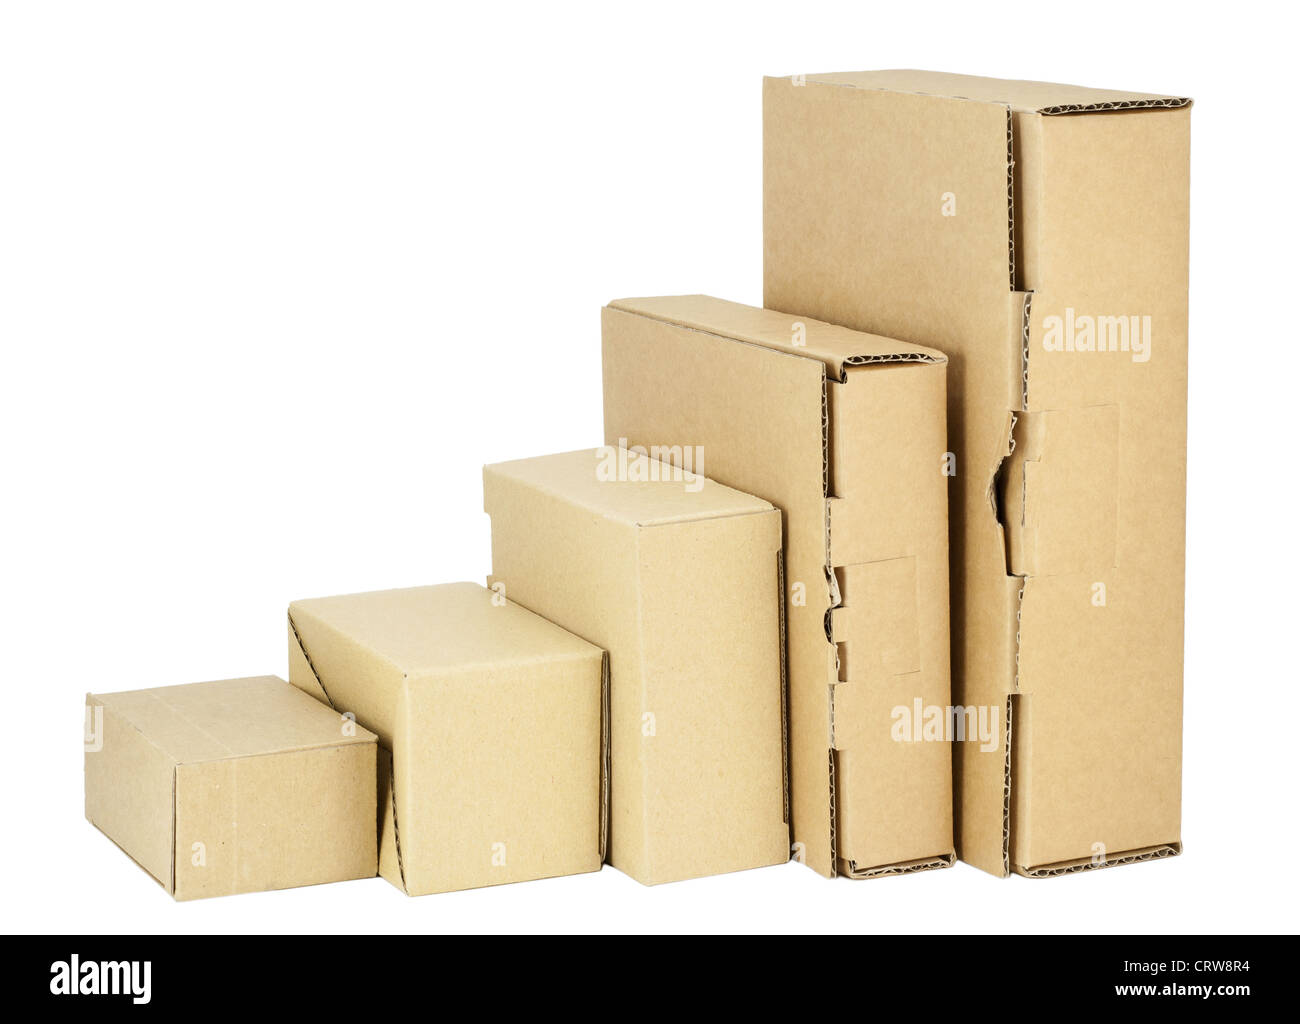 Simple cardboard boxes set for packing Stock Photo